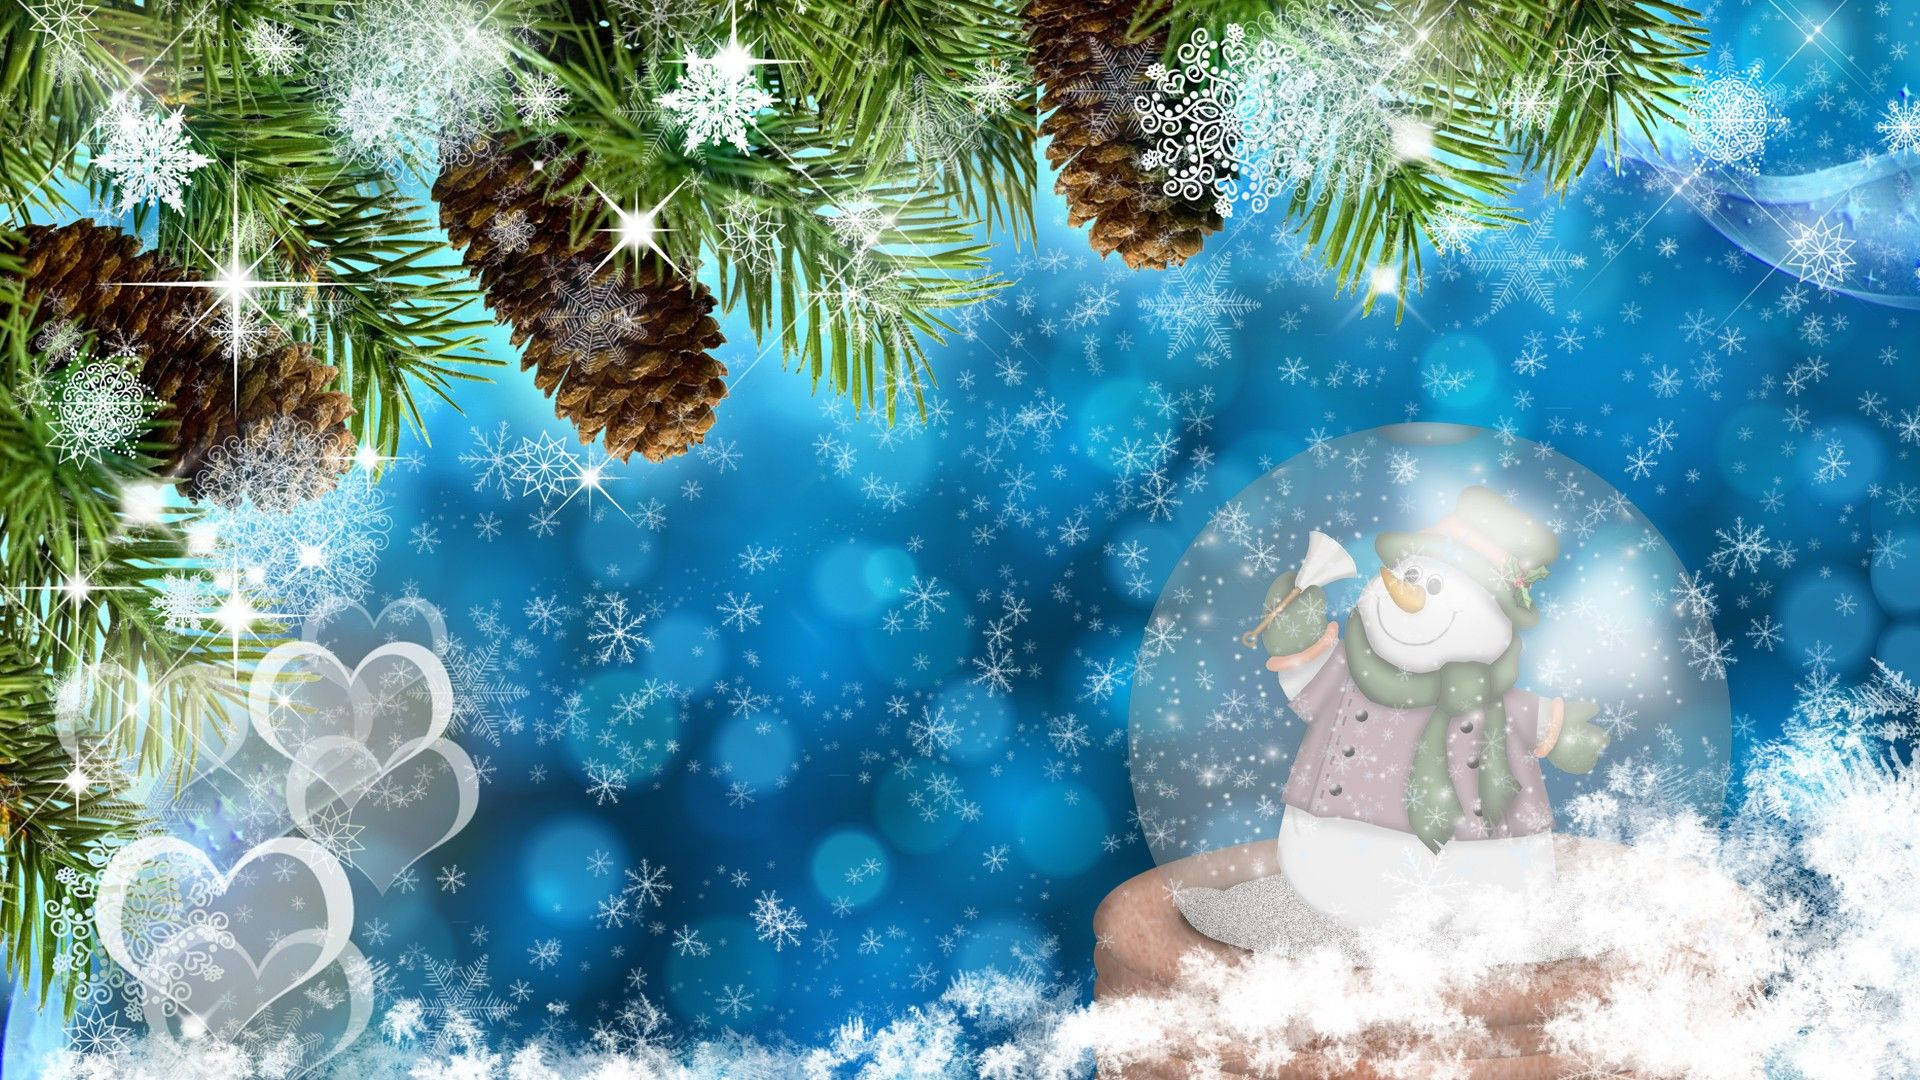 Have a Merry and Peaceful Christmas Wallpaper